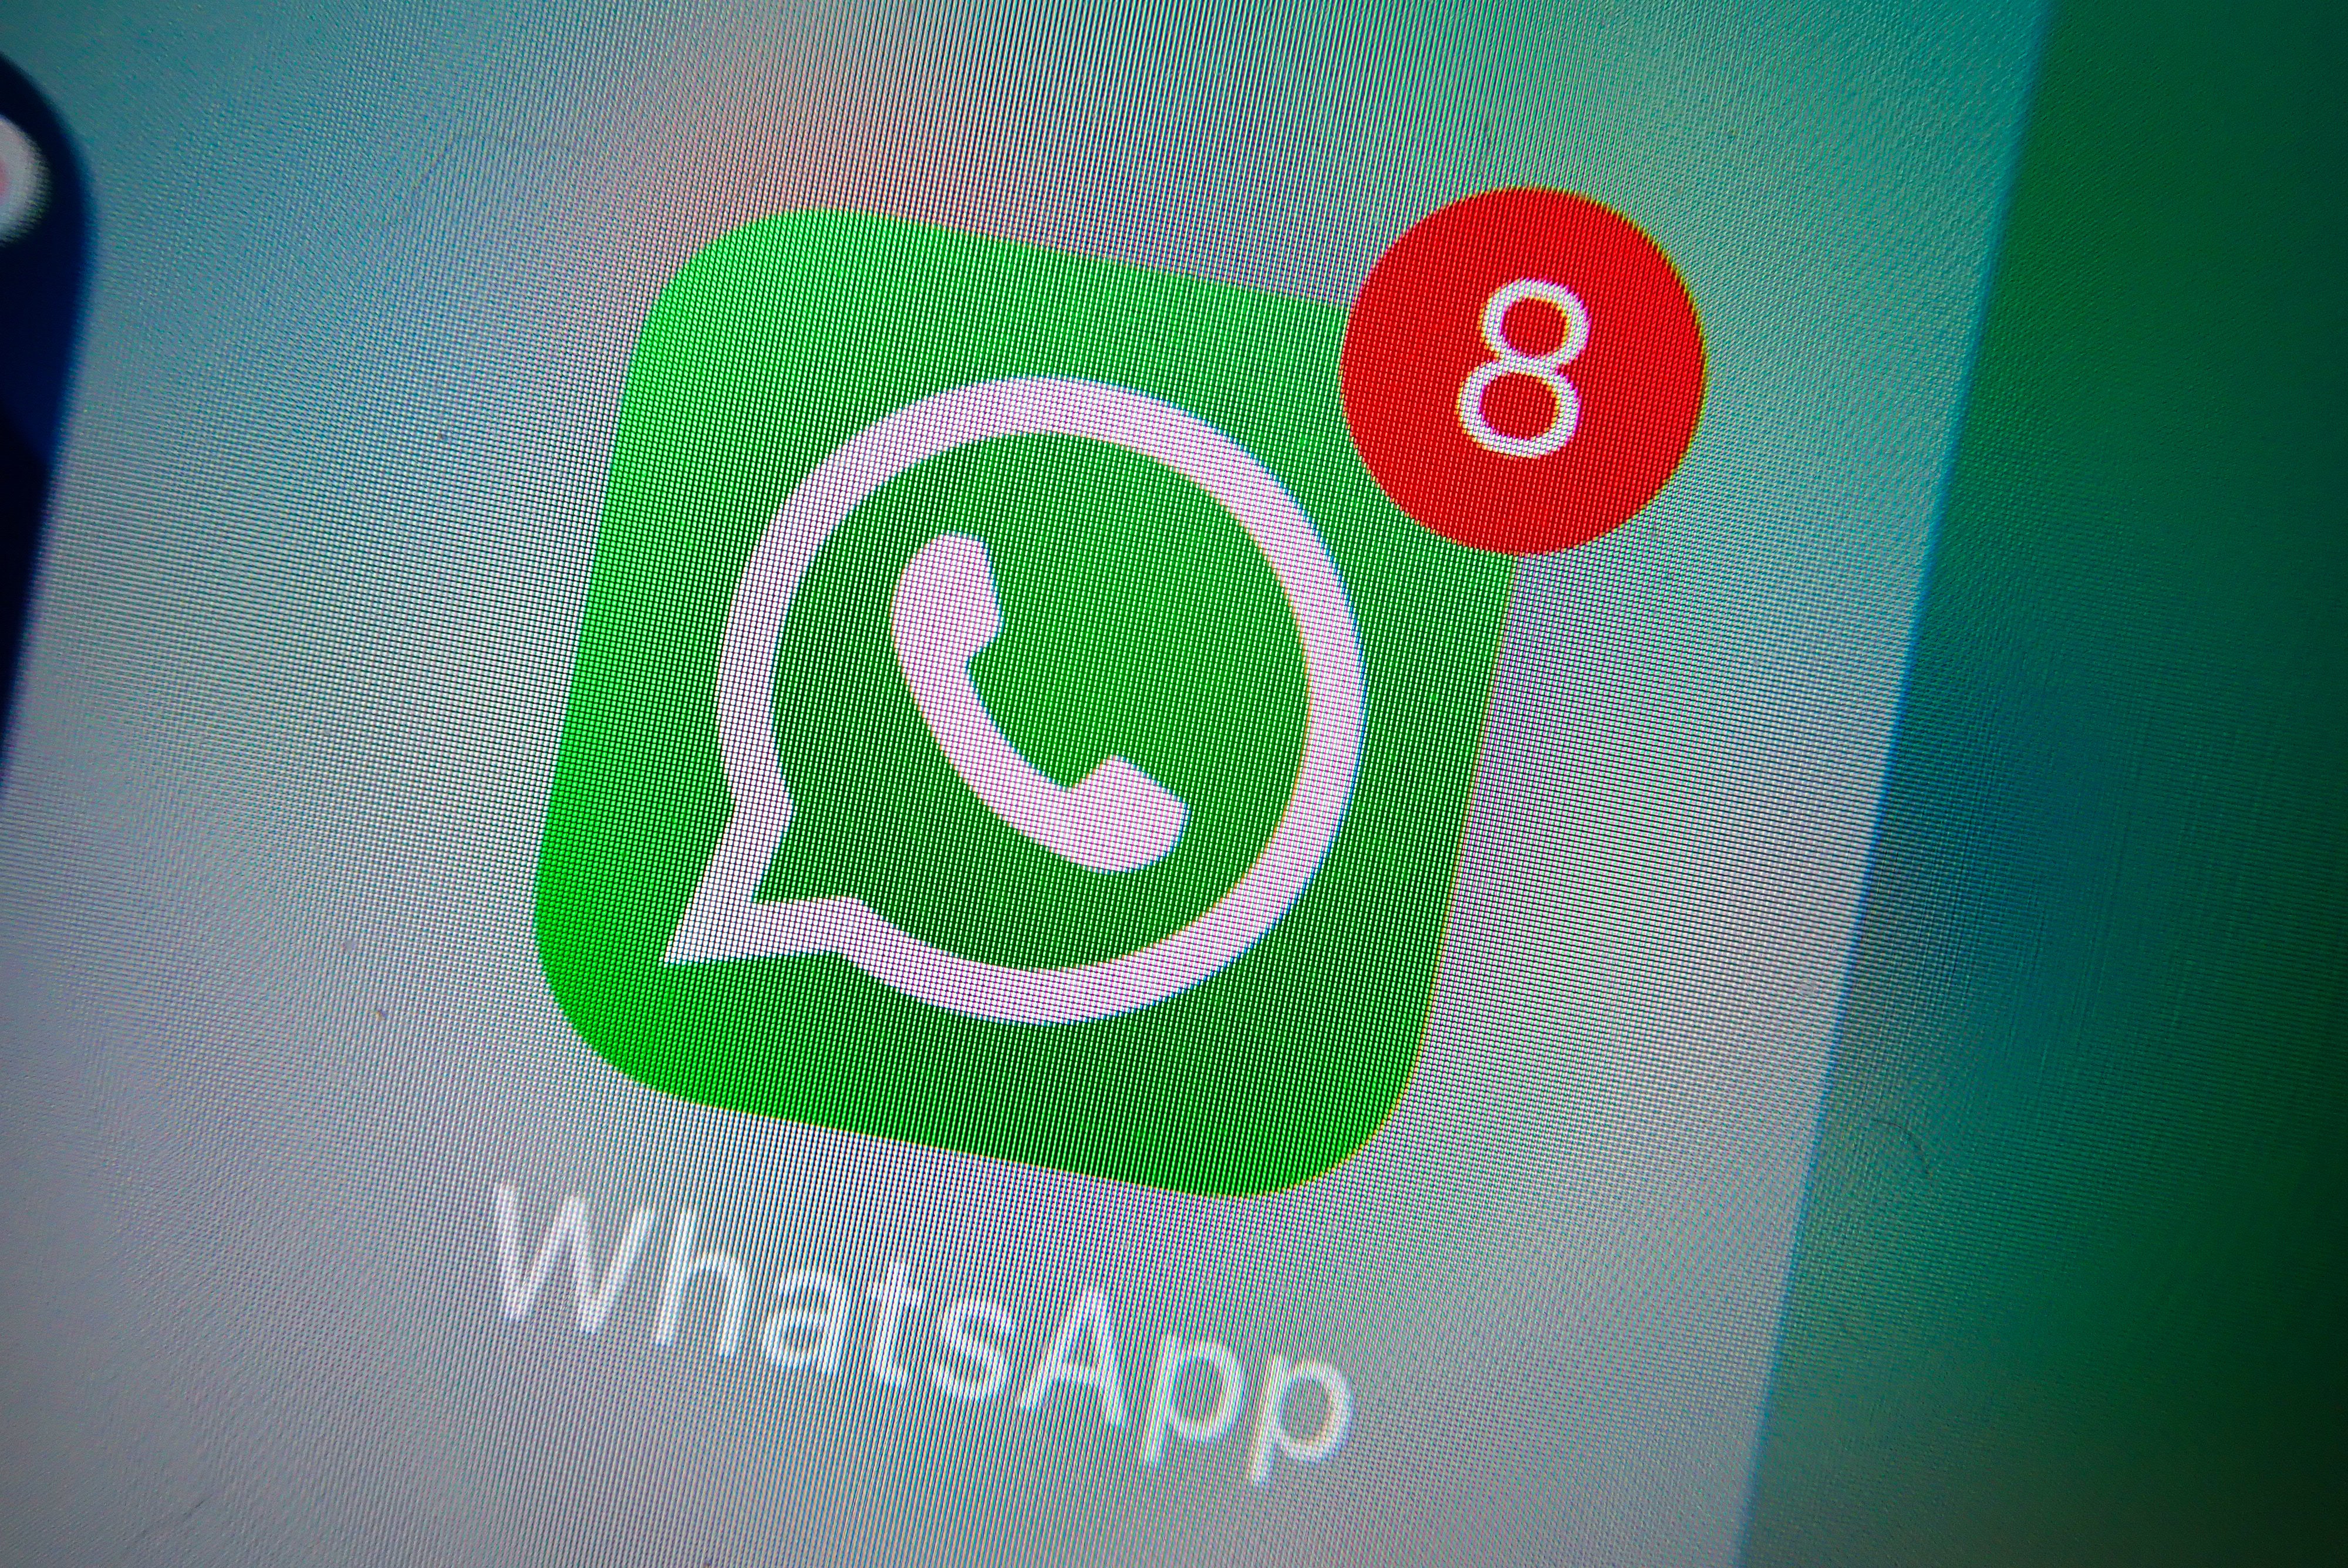 A spokeswoman for WhatsApp says the company has been working with Google to remove the fake adverts. Photo: Shutterstock